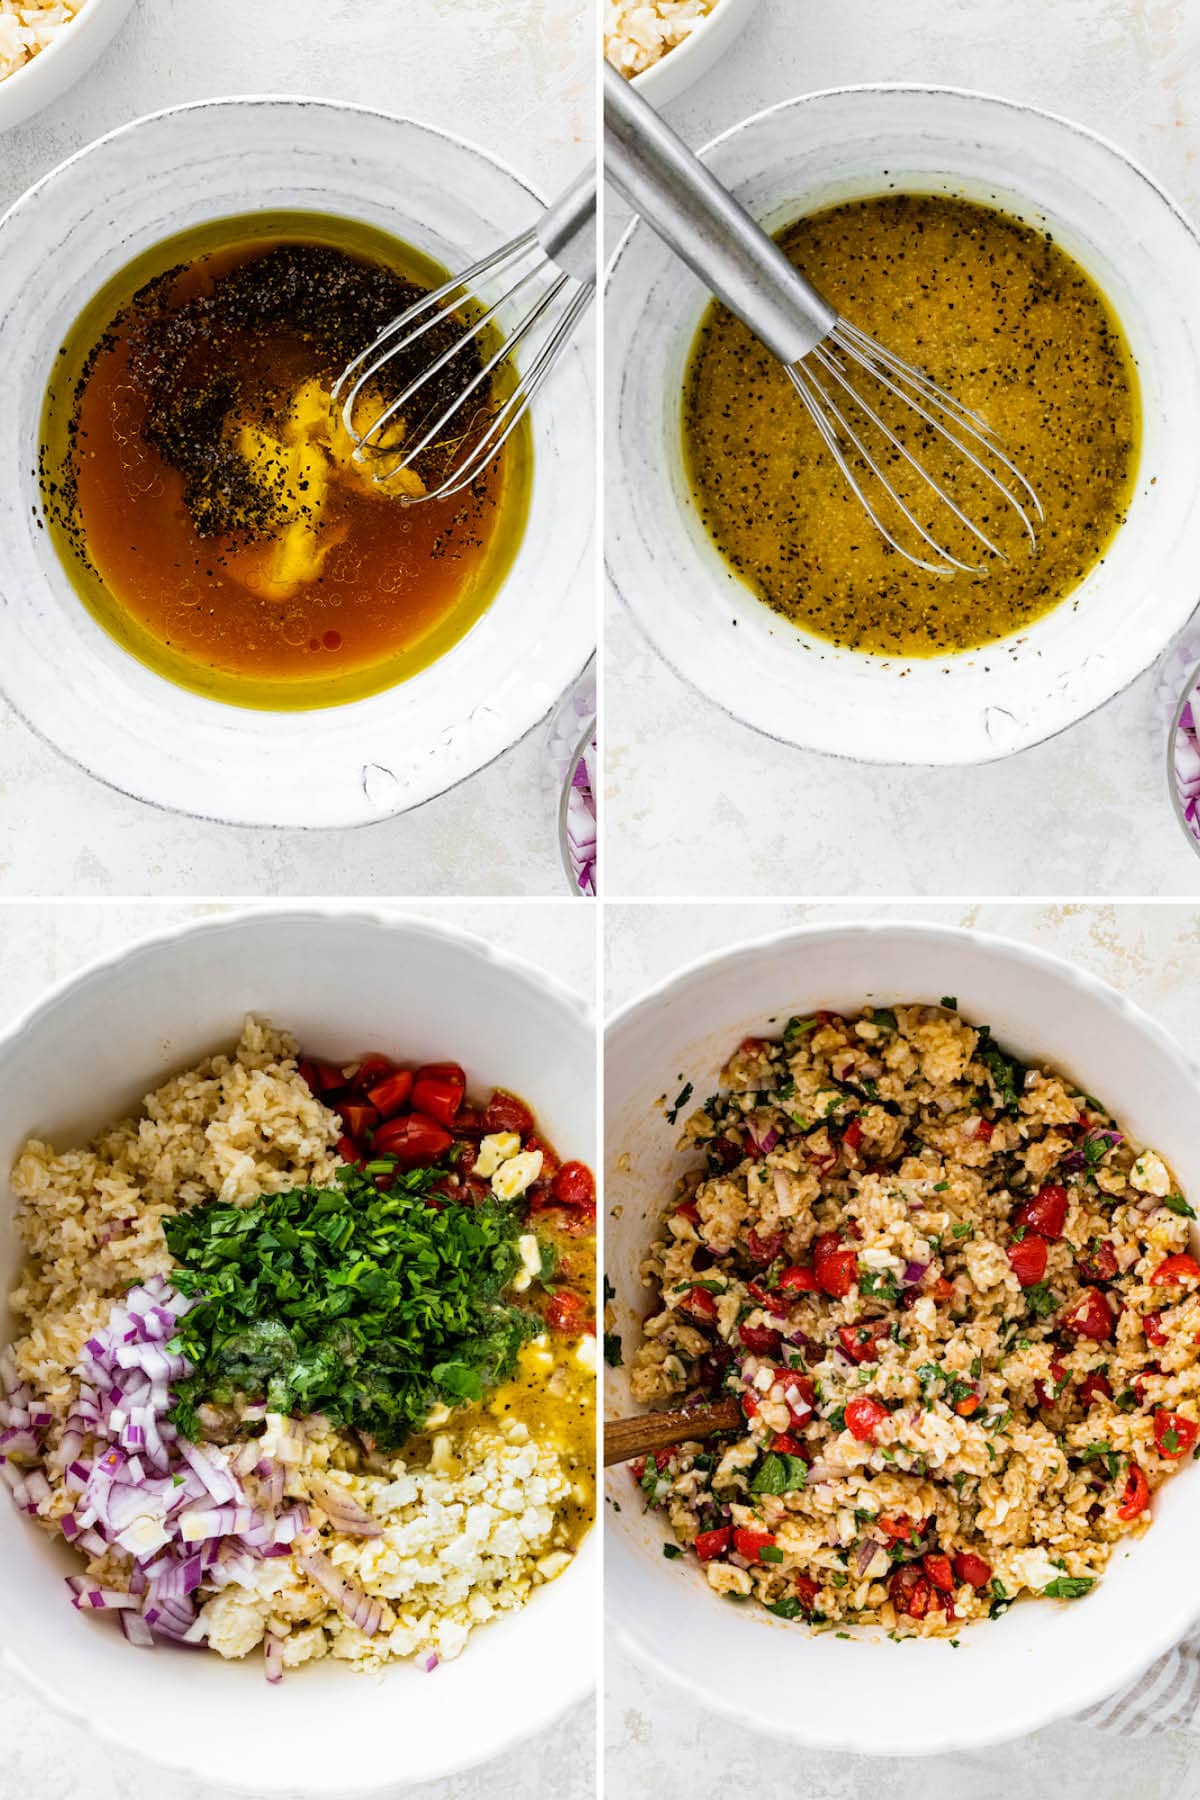 Collage of four photos showing the steps to make Mediterranean Brown Rice Salad: whisking a red wine vinegar dressing and then tossing rice with parsley, feta and veggies.